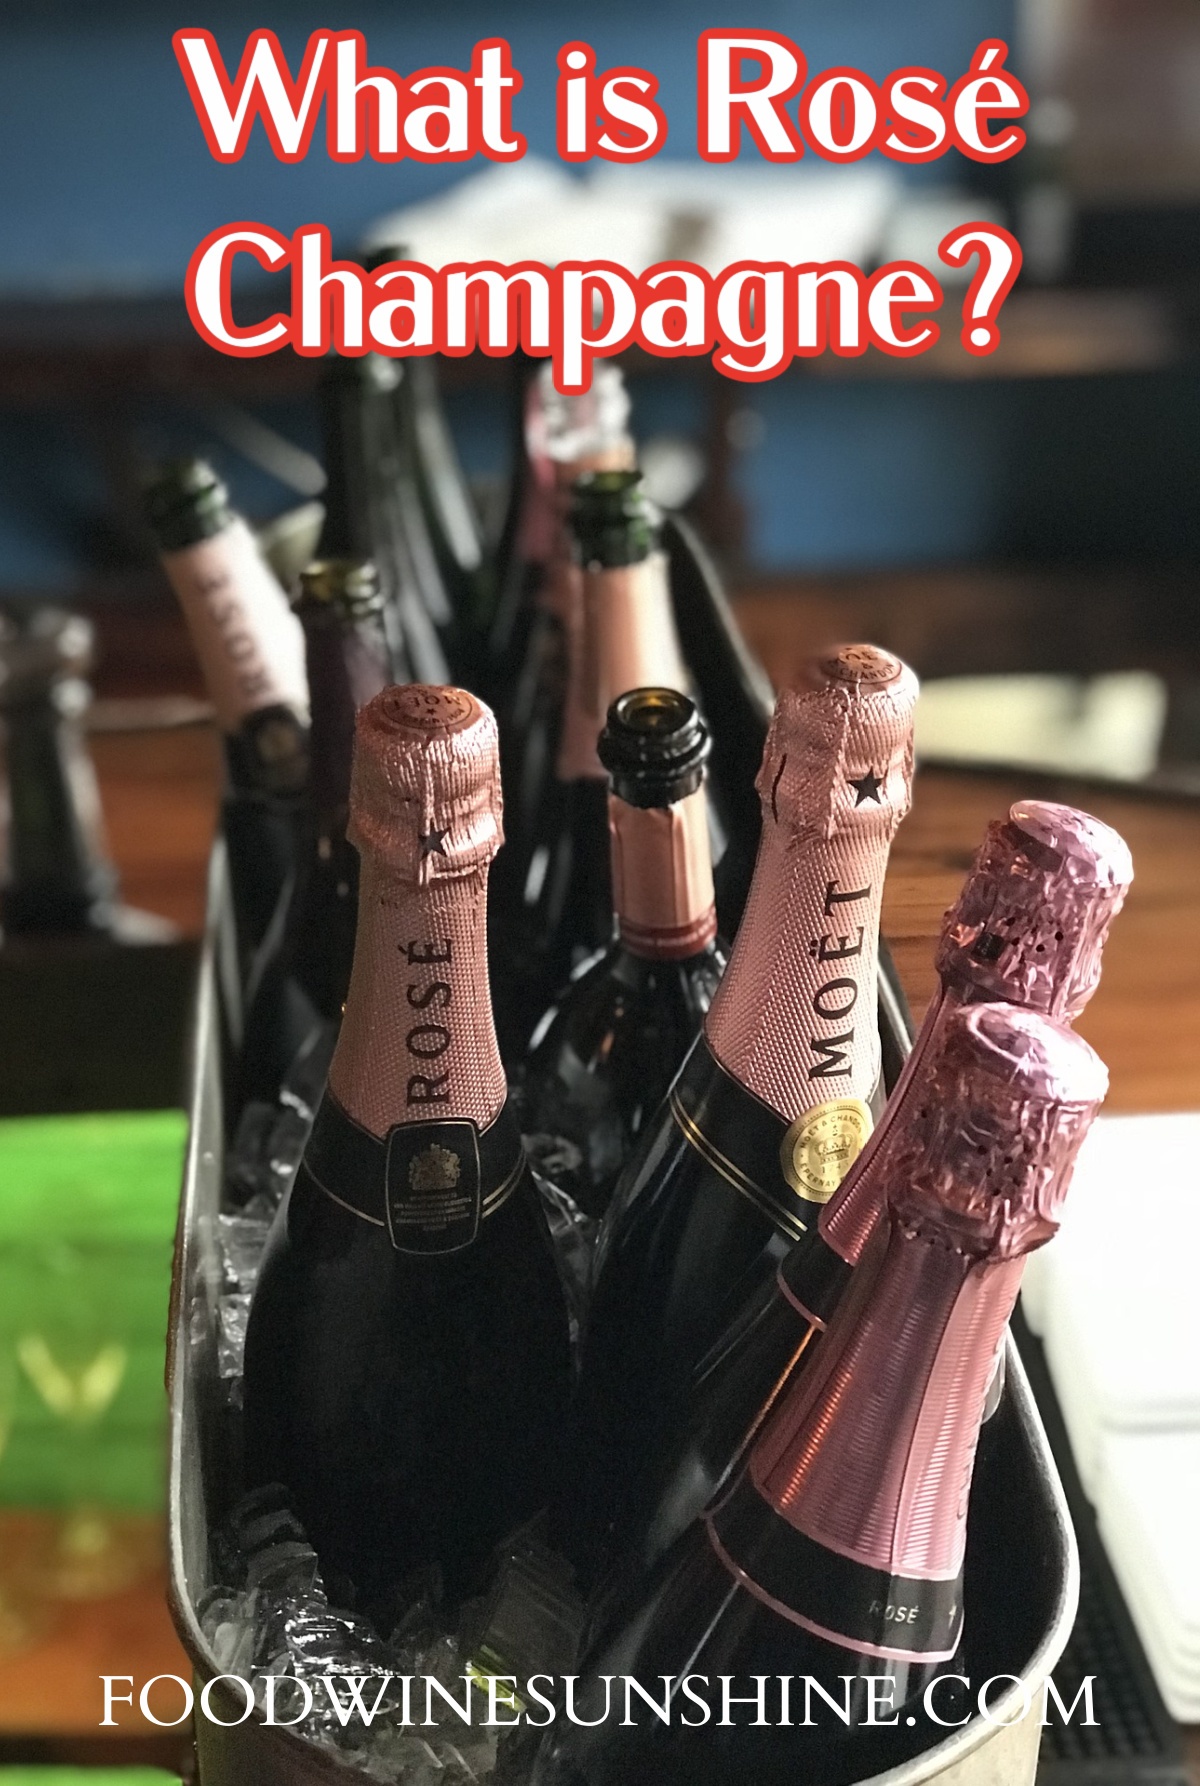 What is Rosé Champagne